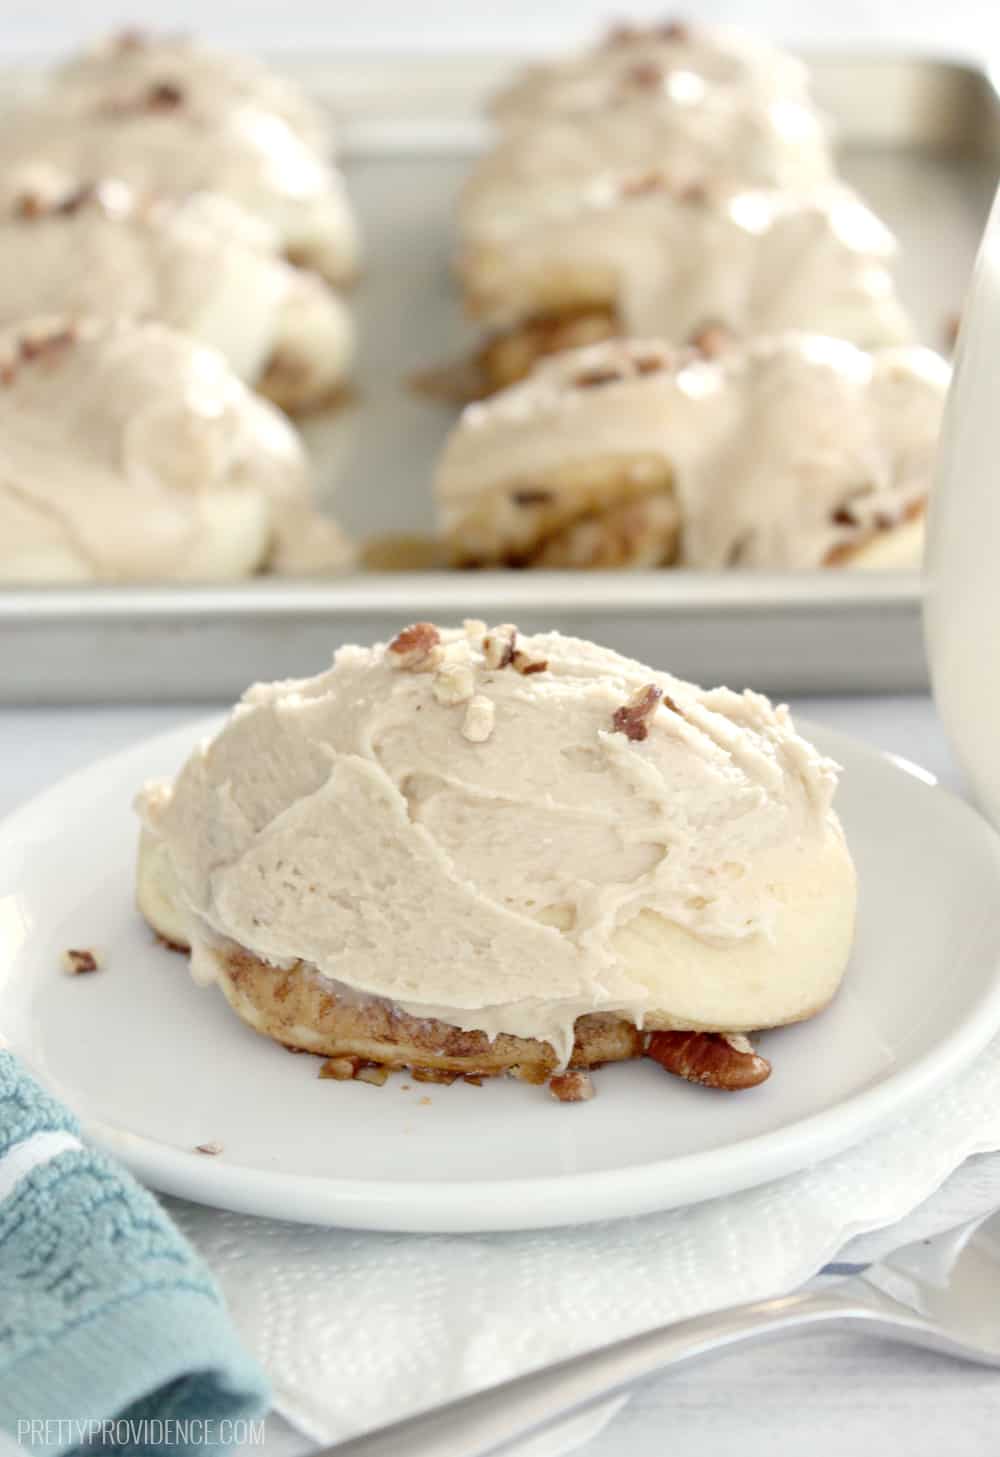 These caramel pecan rolls are unreal good! Super easy too! 